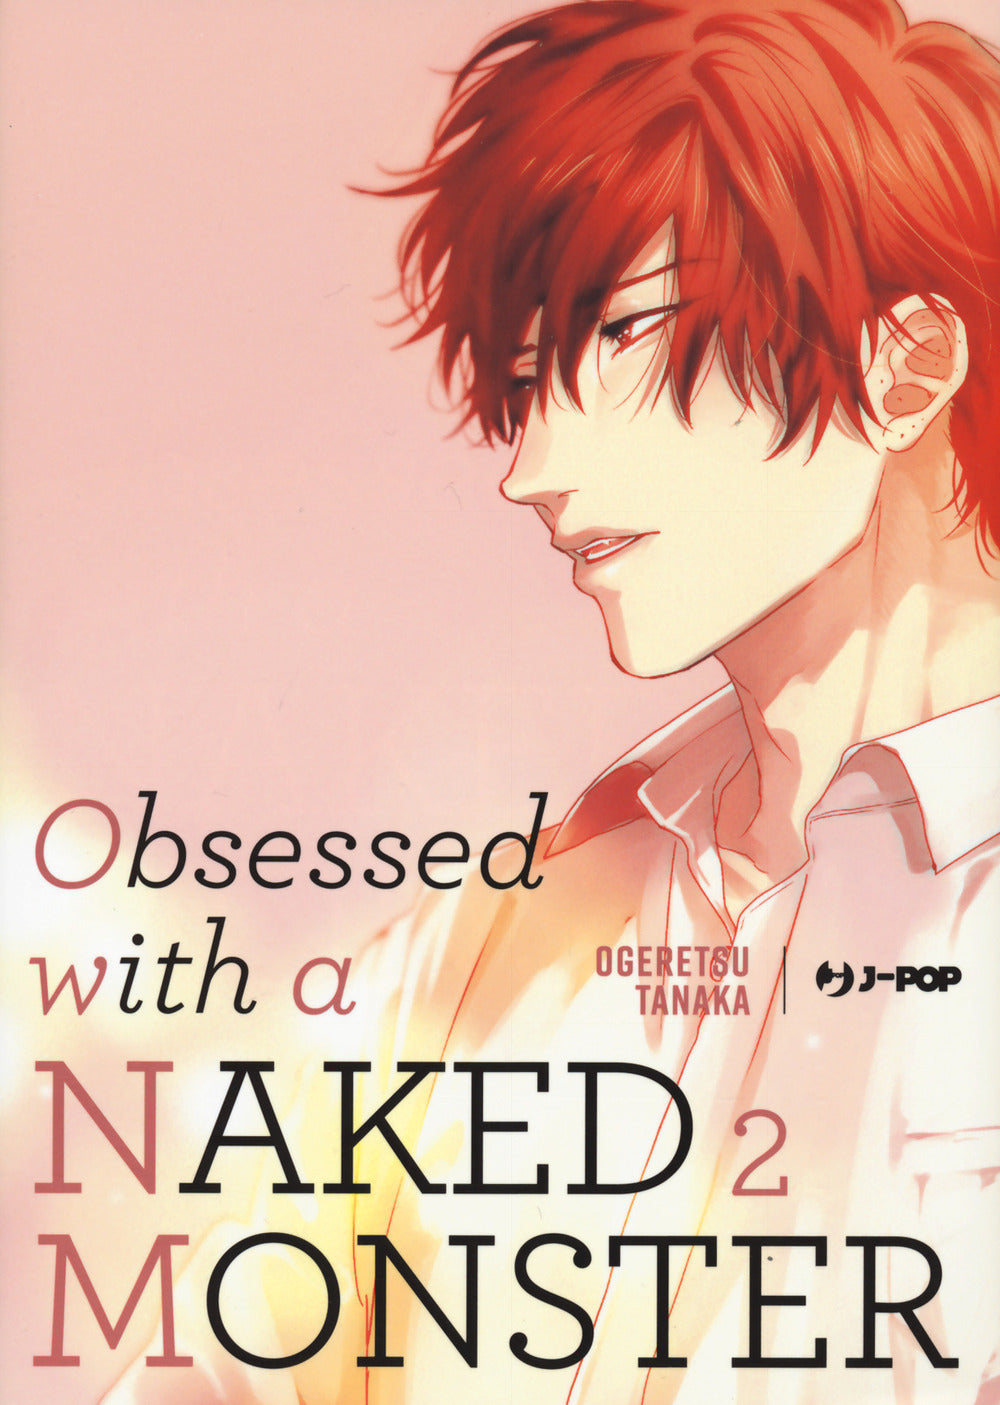 Obsessed with a naked monster. Vol. 2.